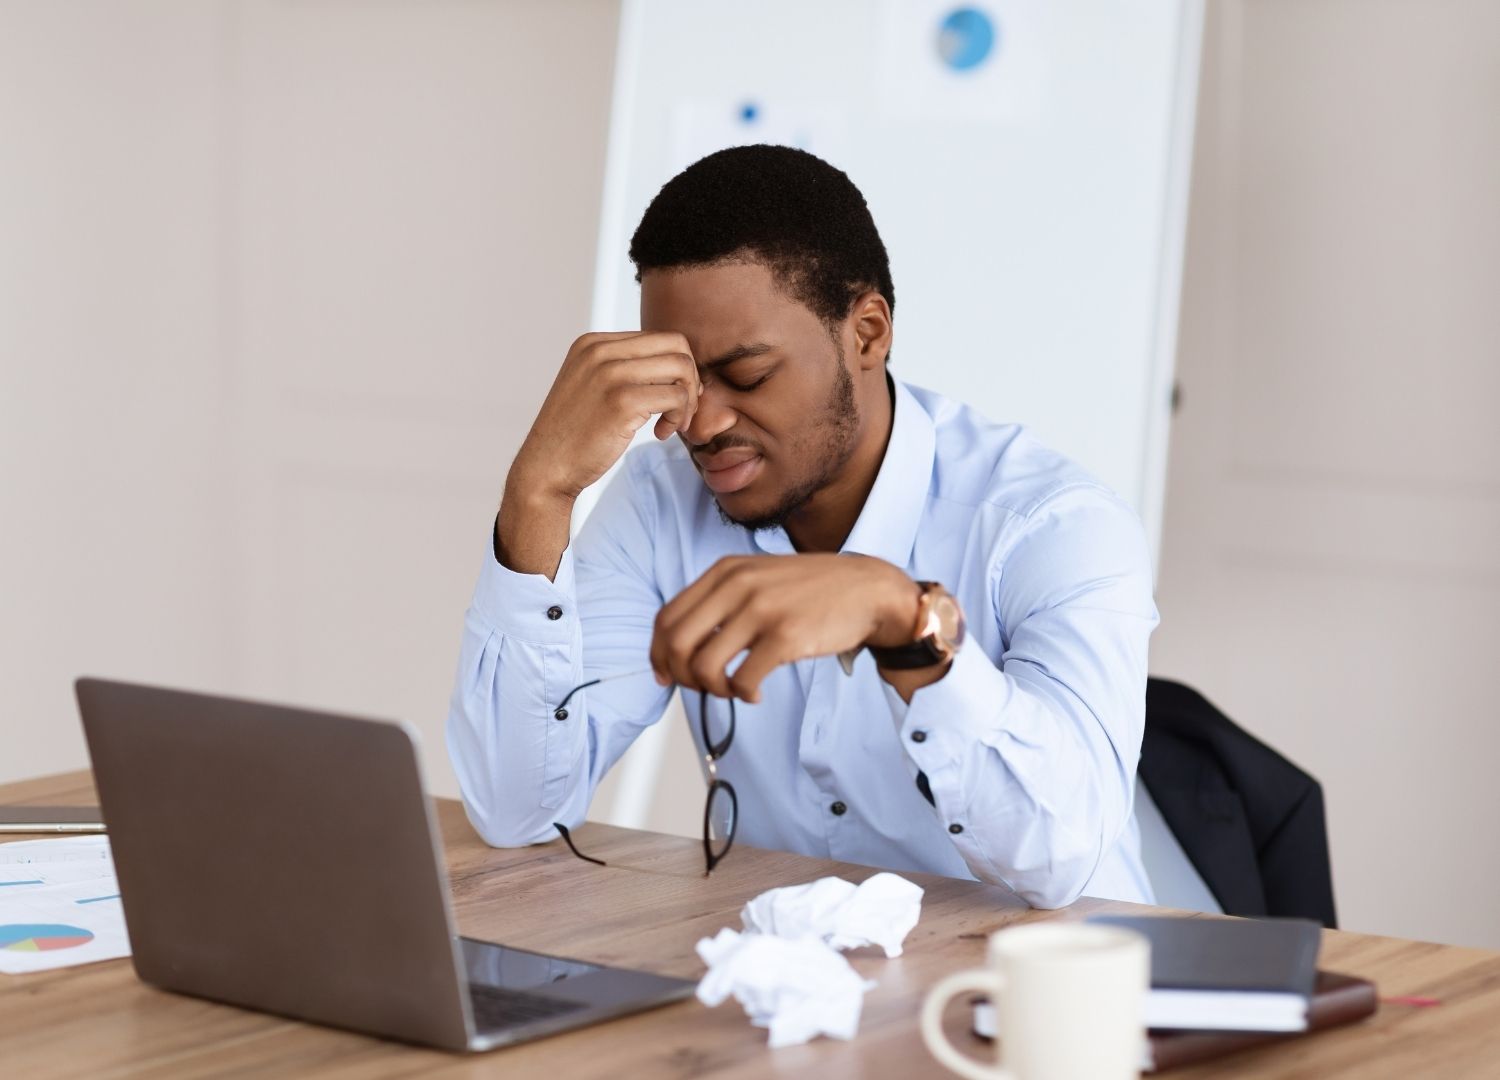 Dealing with Occupational Burnout